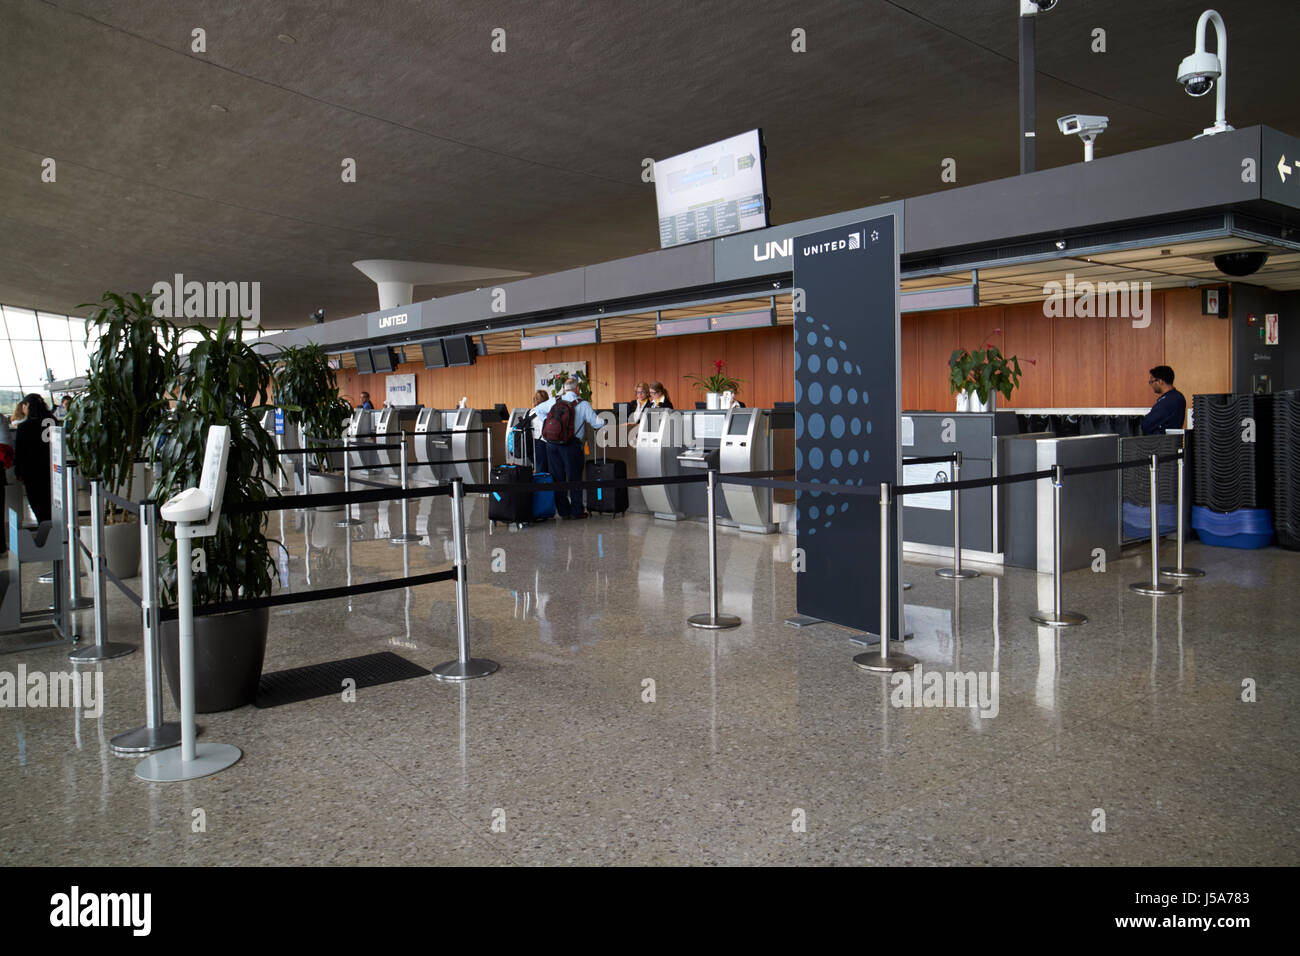 united airlines check in desks main terminal building interior Dulles international airport serving Washington DC USA Stock Photo